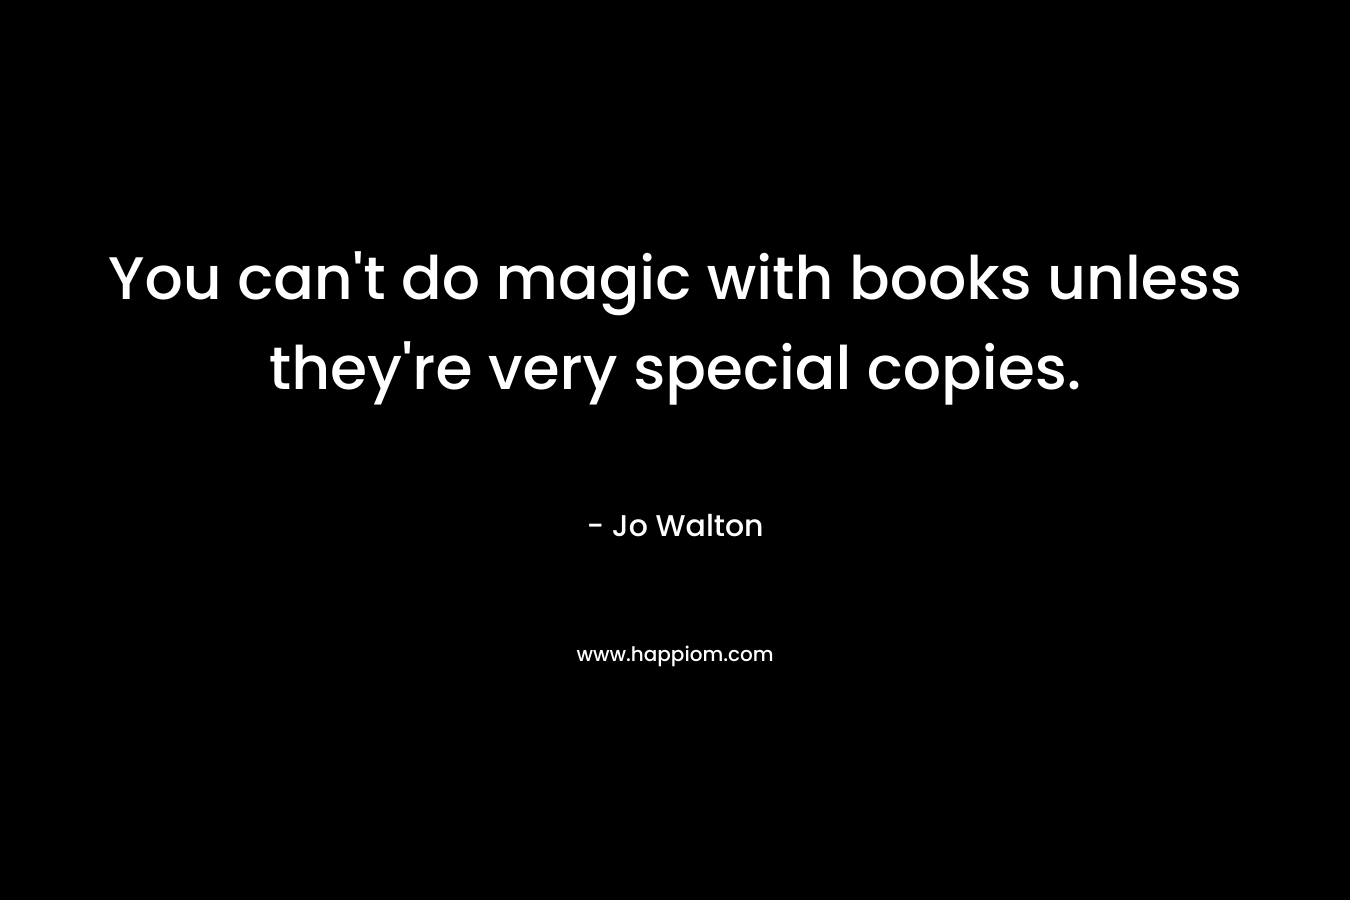 You can't do magic with books unless they're very special copies.